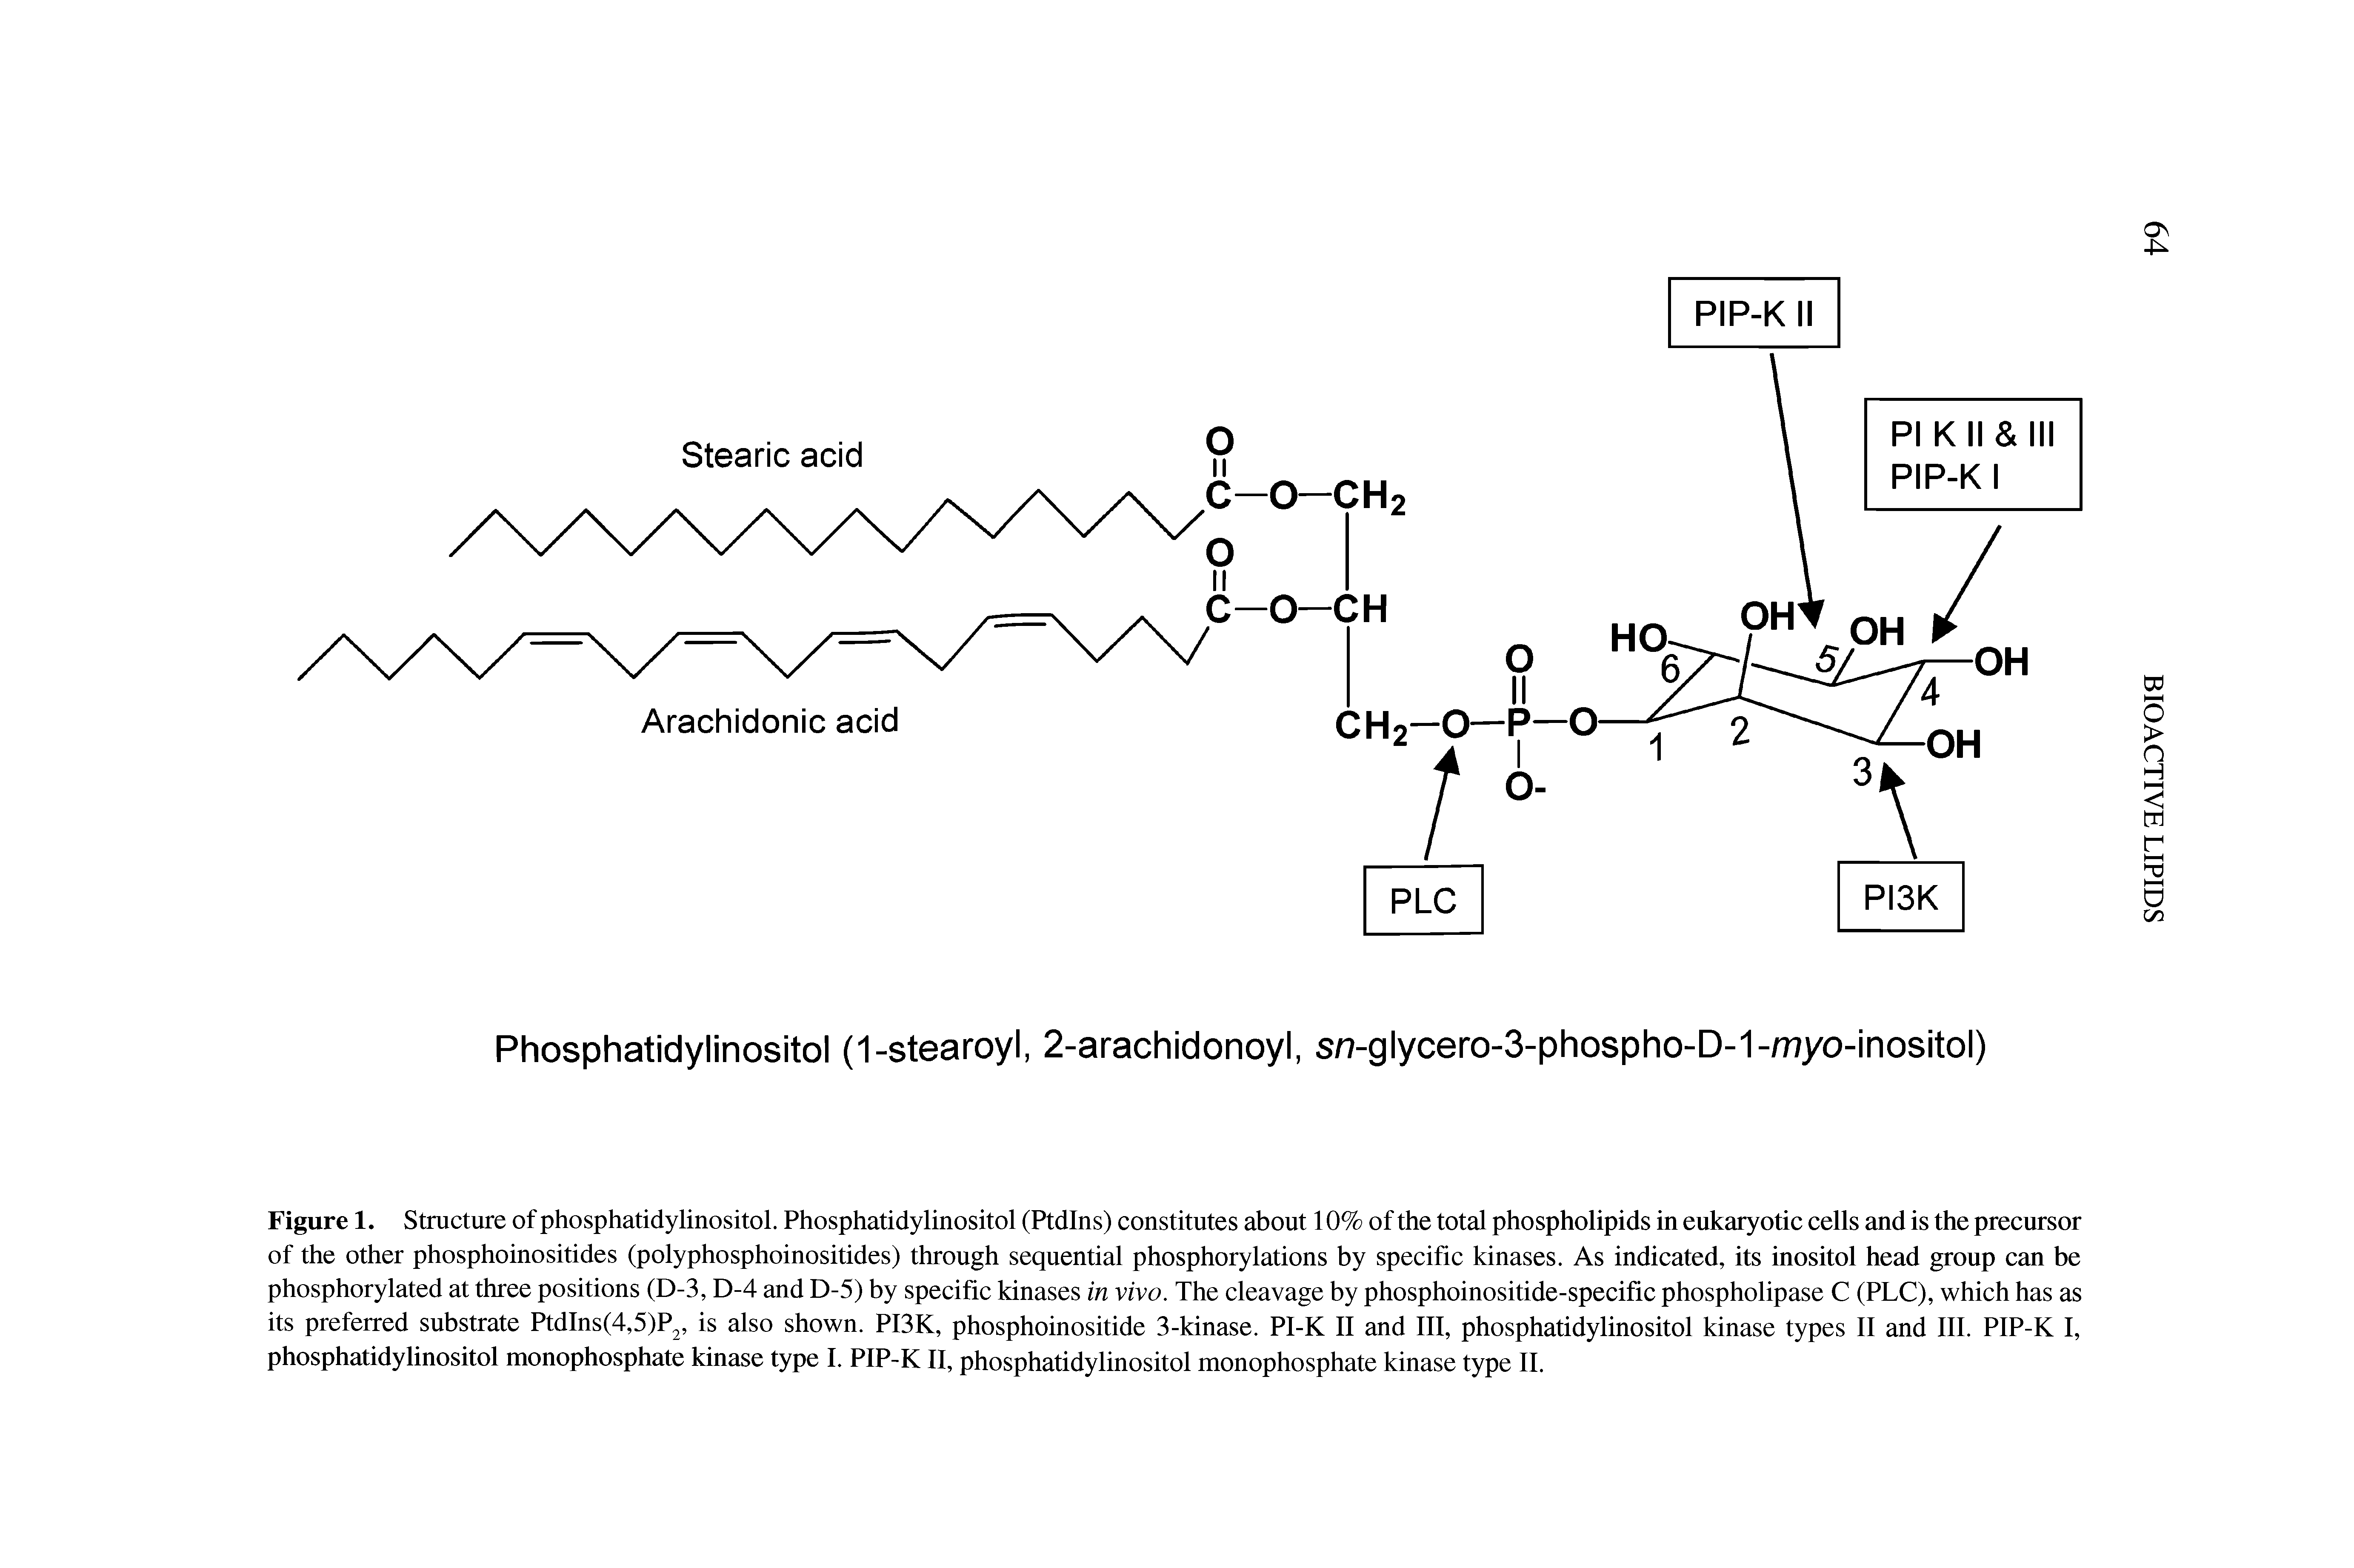 Figure 1. Structure of phosphatidylinositol. Phosphatidylinositol (Ptdins) constitutes about 10% of the total phospholipids in eukaryotic cells and is the precursor of the other phosphoinositides (polyphosphoinositides) through sequential phosphorylations by specific kinases. As indicated, its inositol head group can be phosphorylated at three positions (D-3, D-4 and D-5) by specific kinases in vivo. The cleavage by phosphoinositide-specific phospholipase C (PLC), which has as its preferred substrate PtdIns(4,5)P2, is also shown. PI3K, phosphoinositide 3-kinase. PI-K II and III, phosphatidylinositol kinase types II and III. PIP-K I, phosphatidylinositol monophosphate kinase type I. PIP-K II, phosphatidylinositol monophosphate kinase type II.